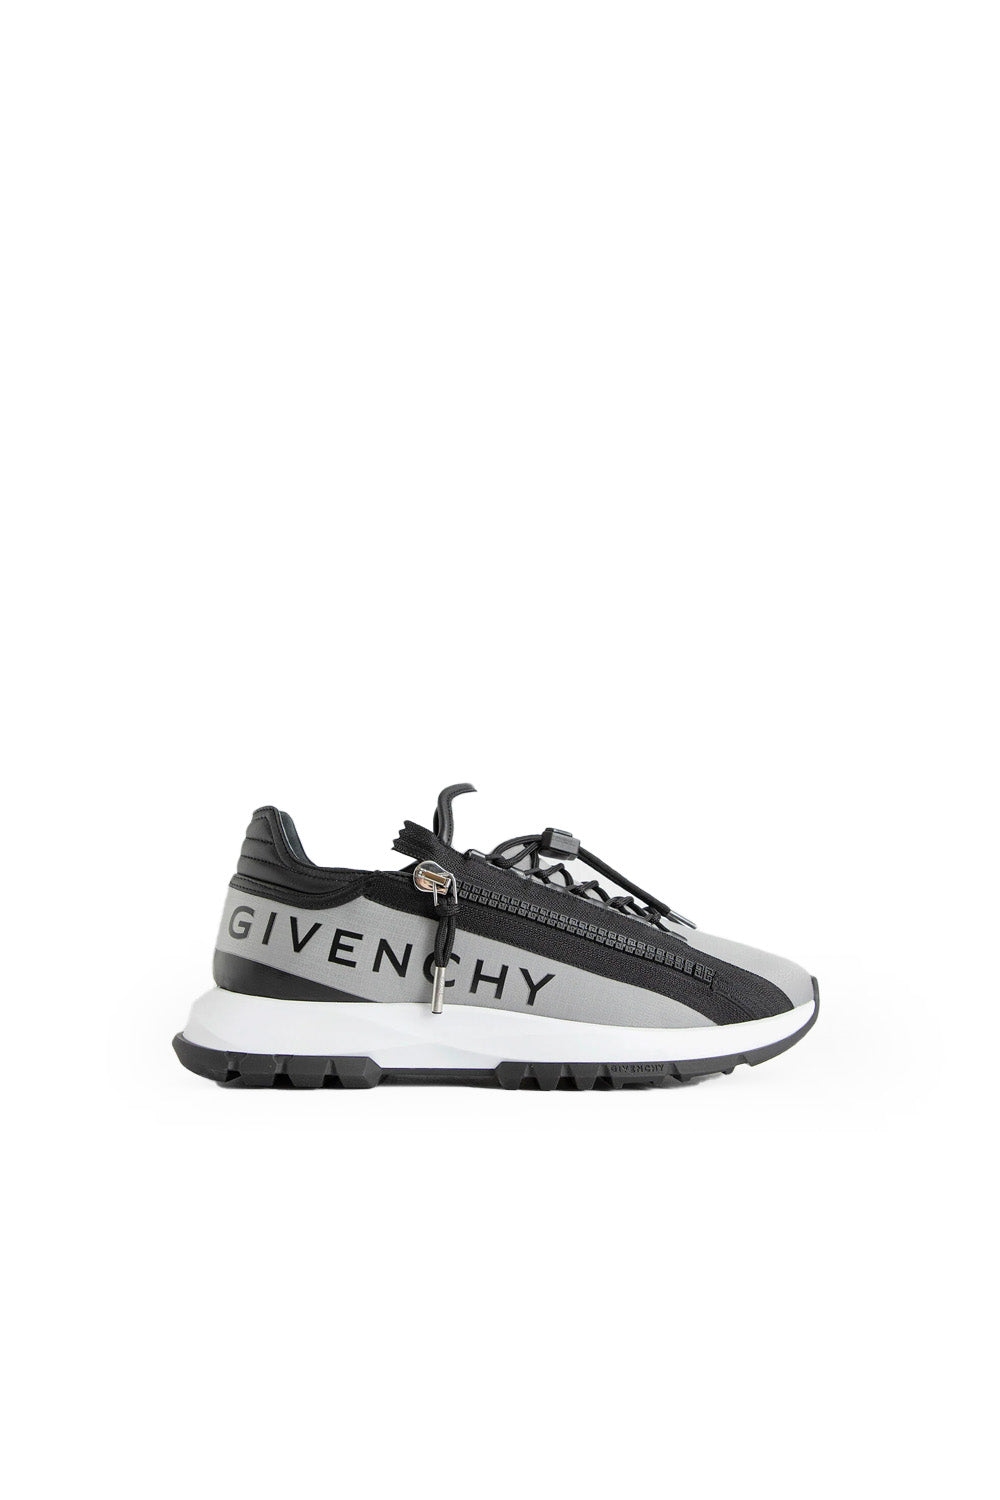 Givenchy Spectre logo-print zip sneakers